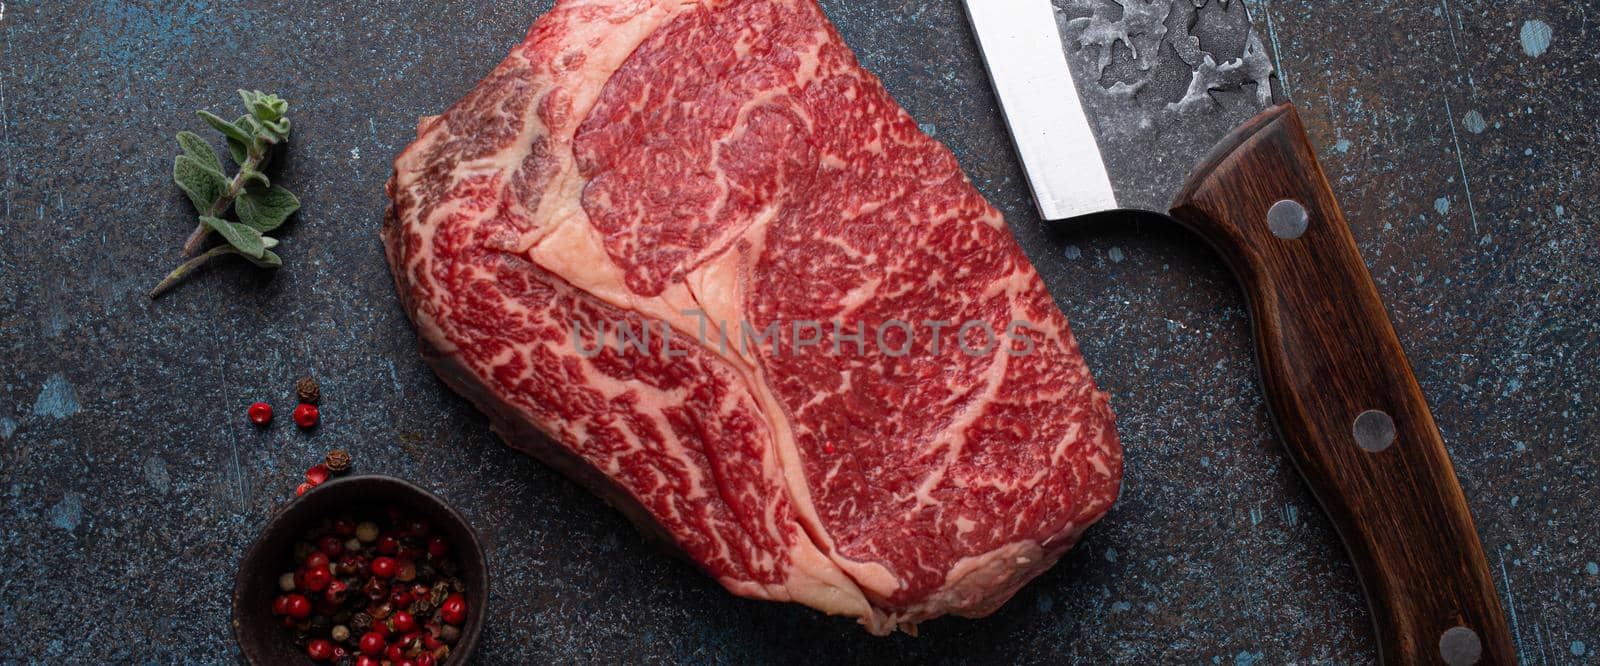 Raw meat beef marbled prime cut steak Ribeye on rustic concrete kitchen table background from above with big knife and spices, beefsteak concept